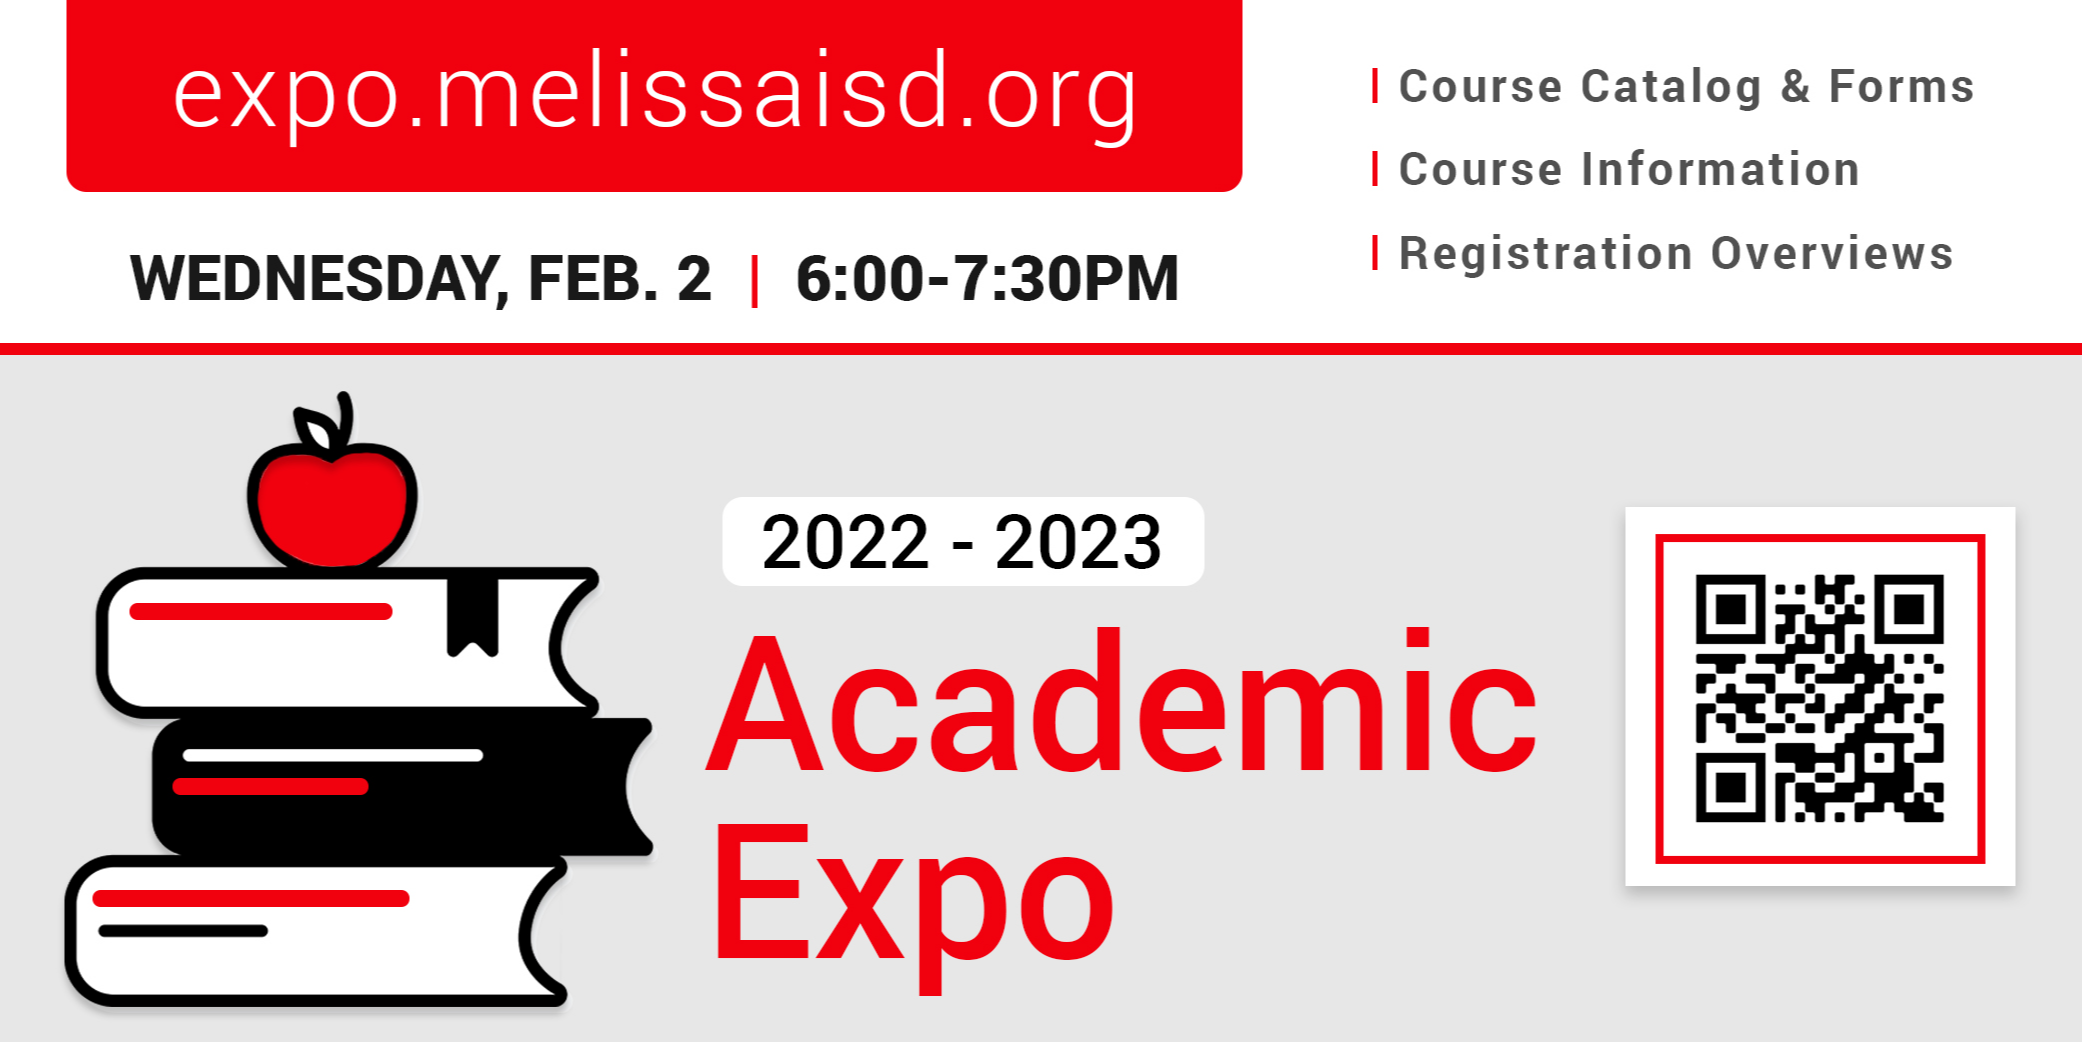 a banner advertising the Academic Expo